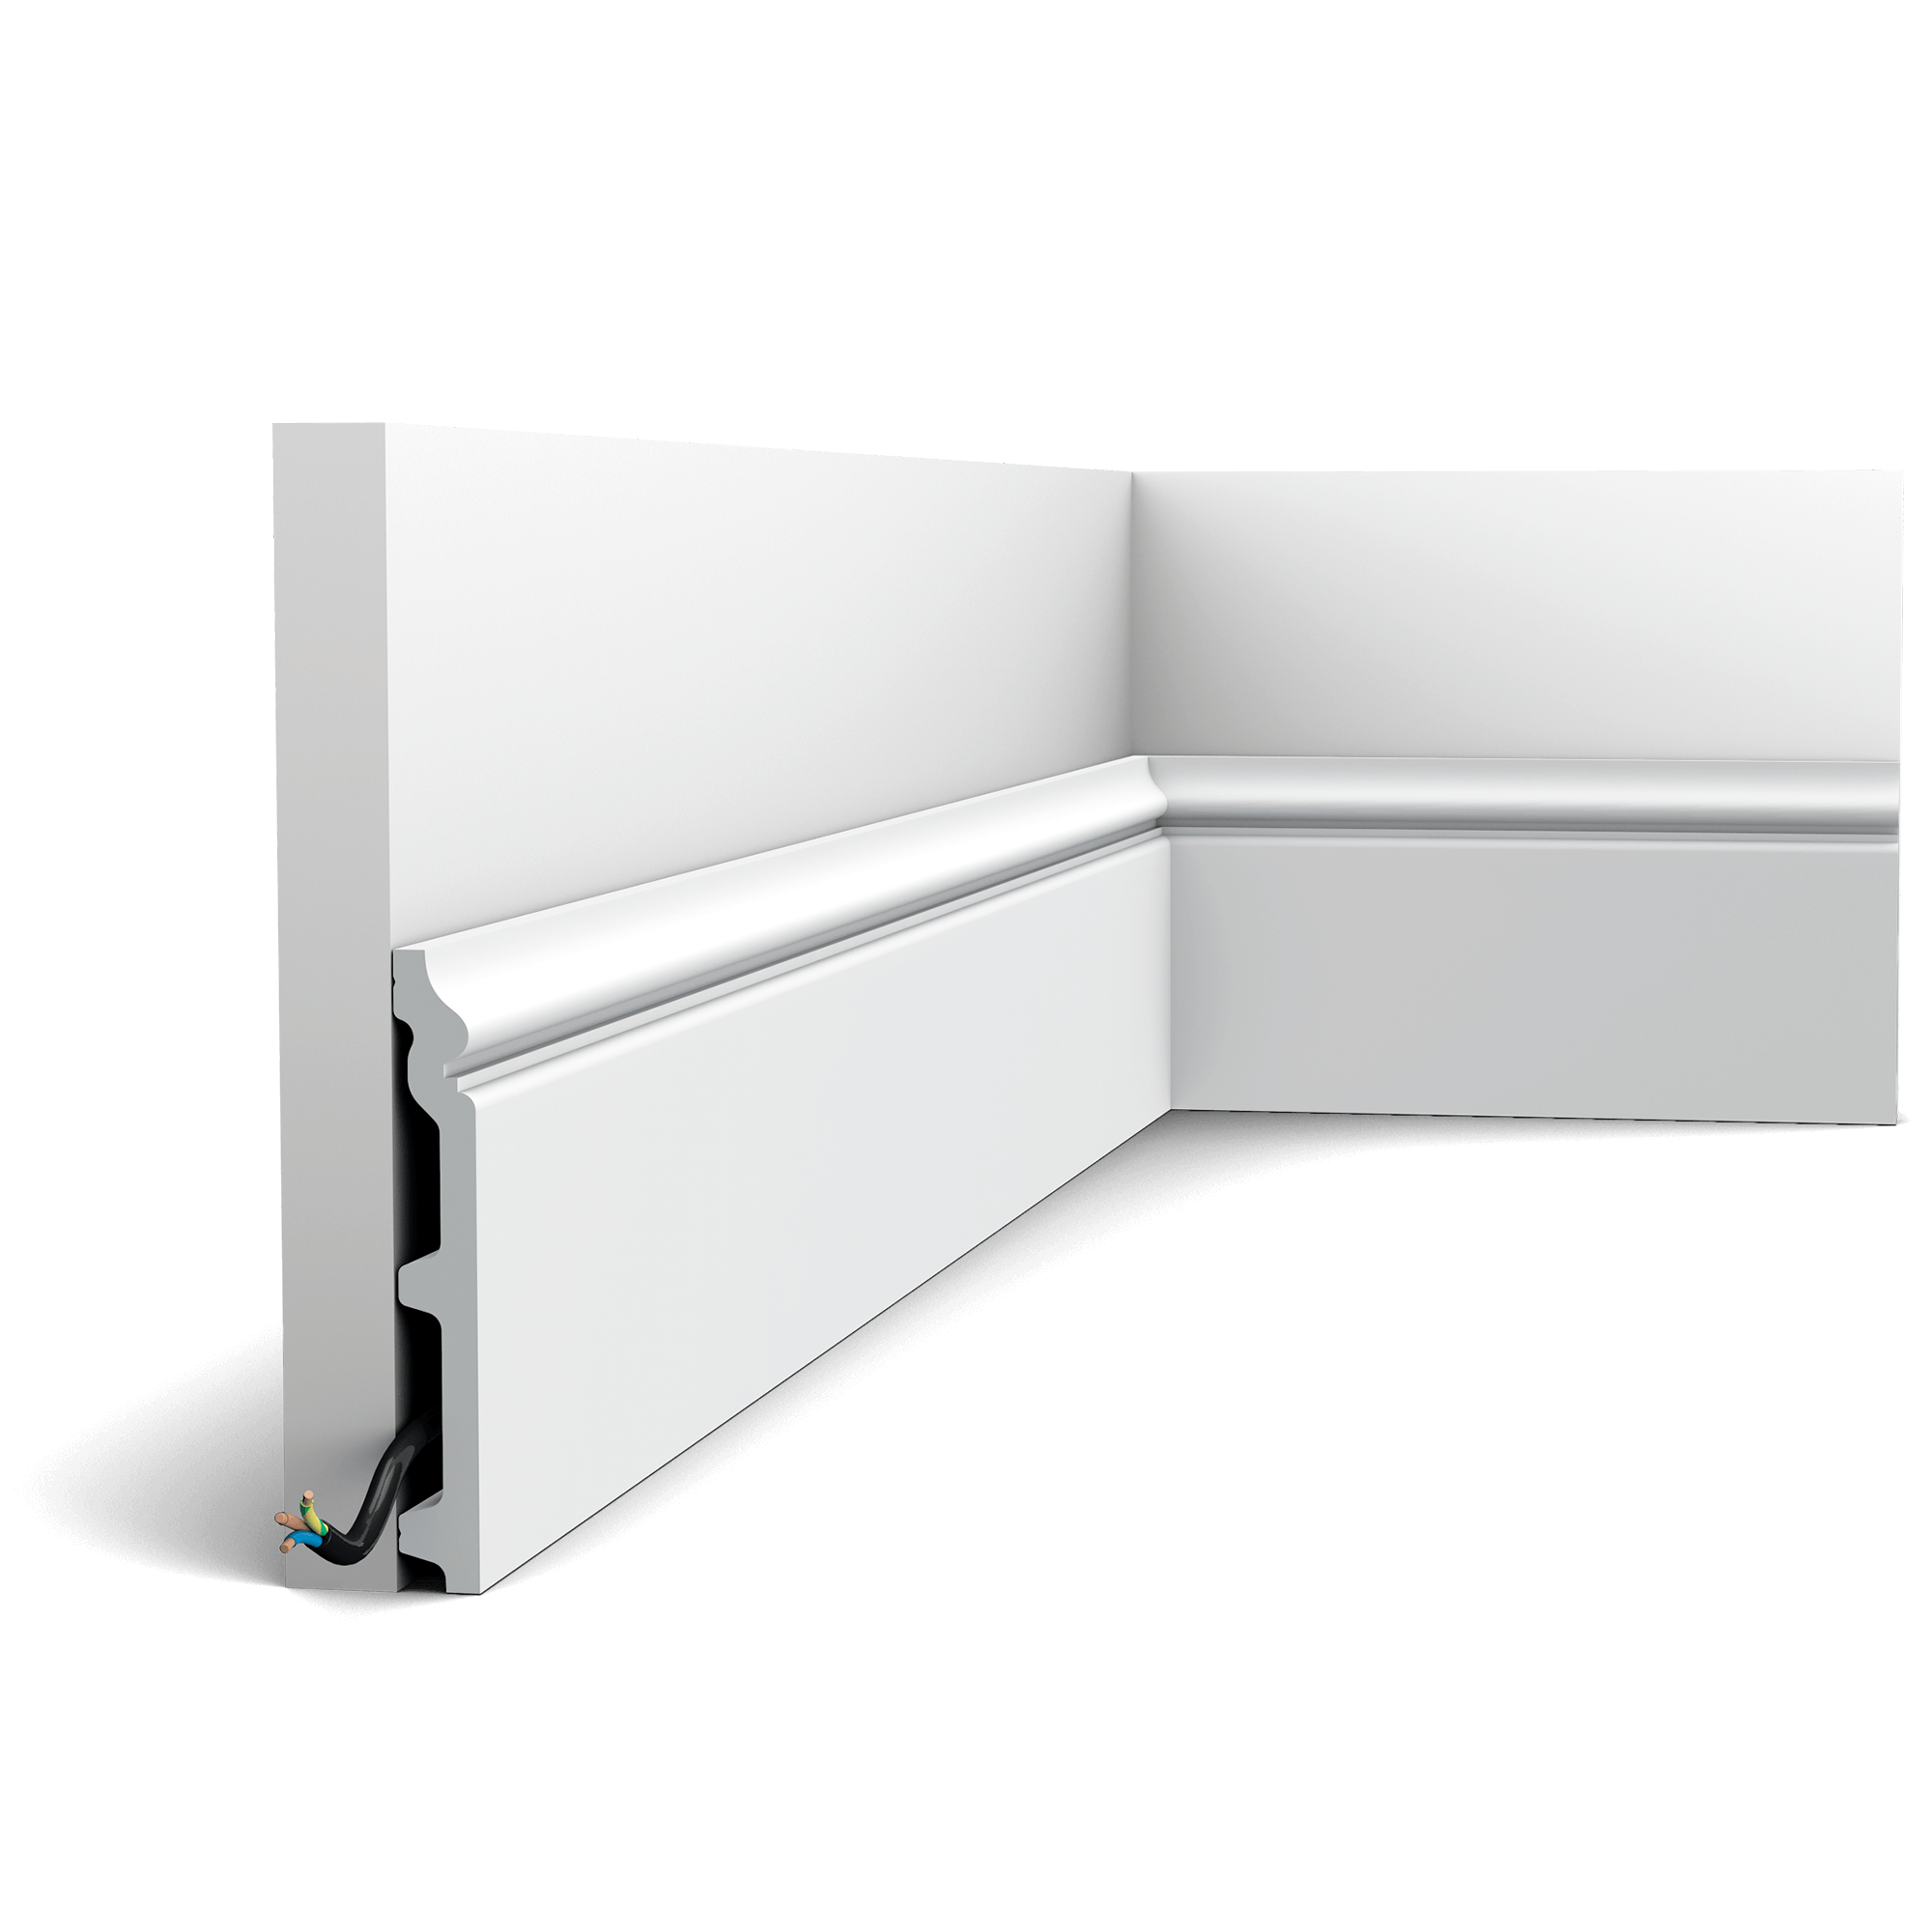 NEW - Product finished with RAL9003 Signal white. It is not necessary to repaint this profile after installation. This classic skirting board is part of the CONTOUR family. To create a consistent look for the entire dwelling, we provide the same design in various sizes.